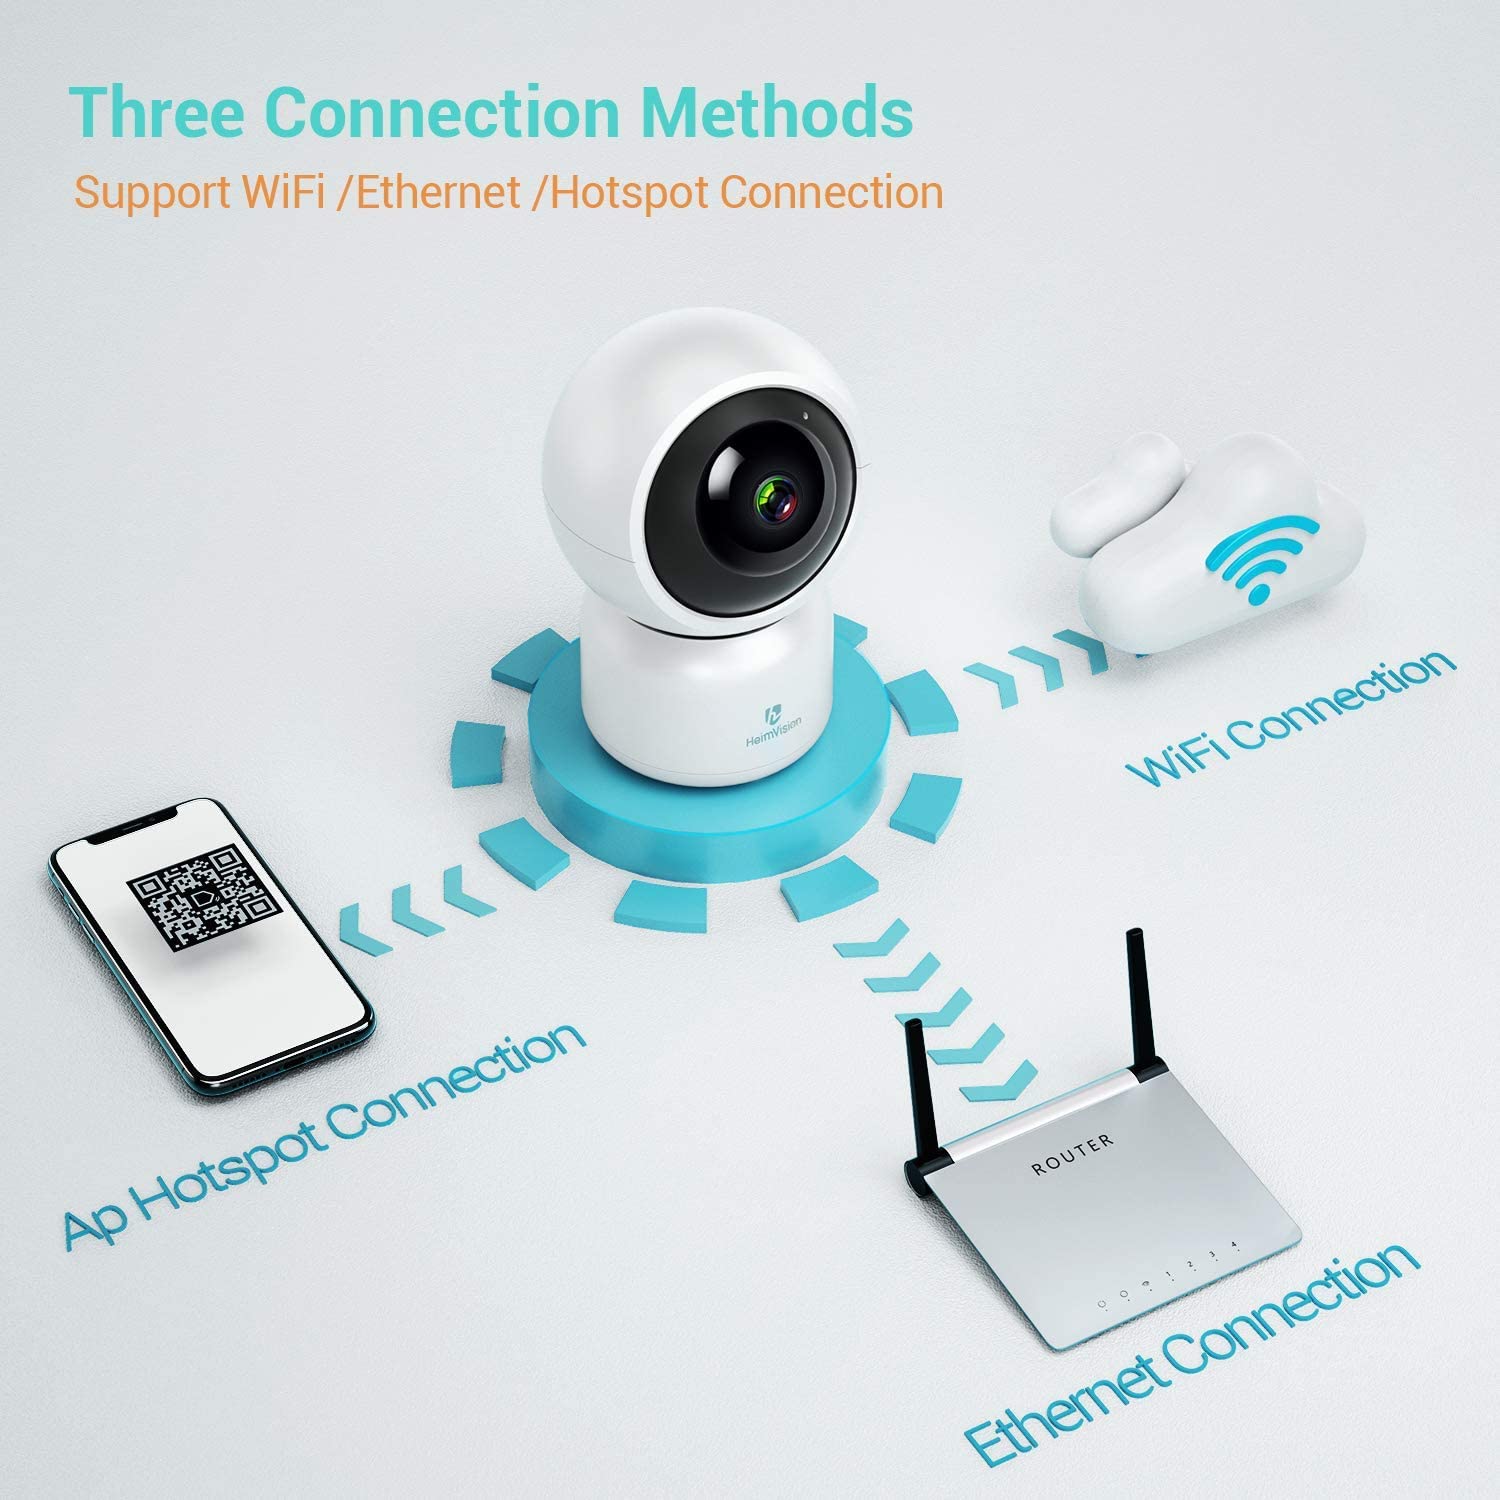 HeimVision HM203 Security Camera - e4cents